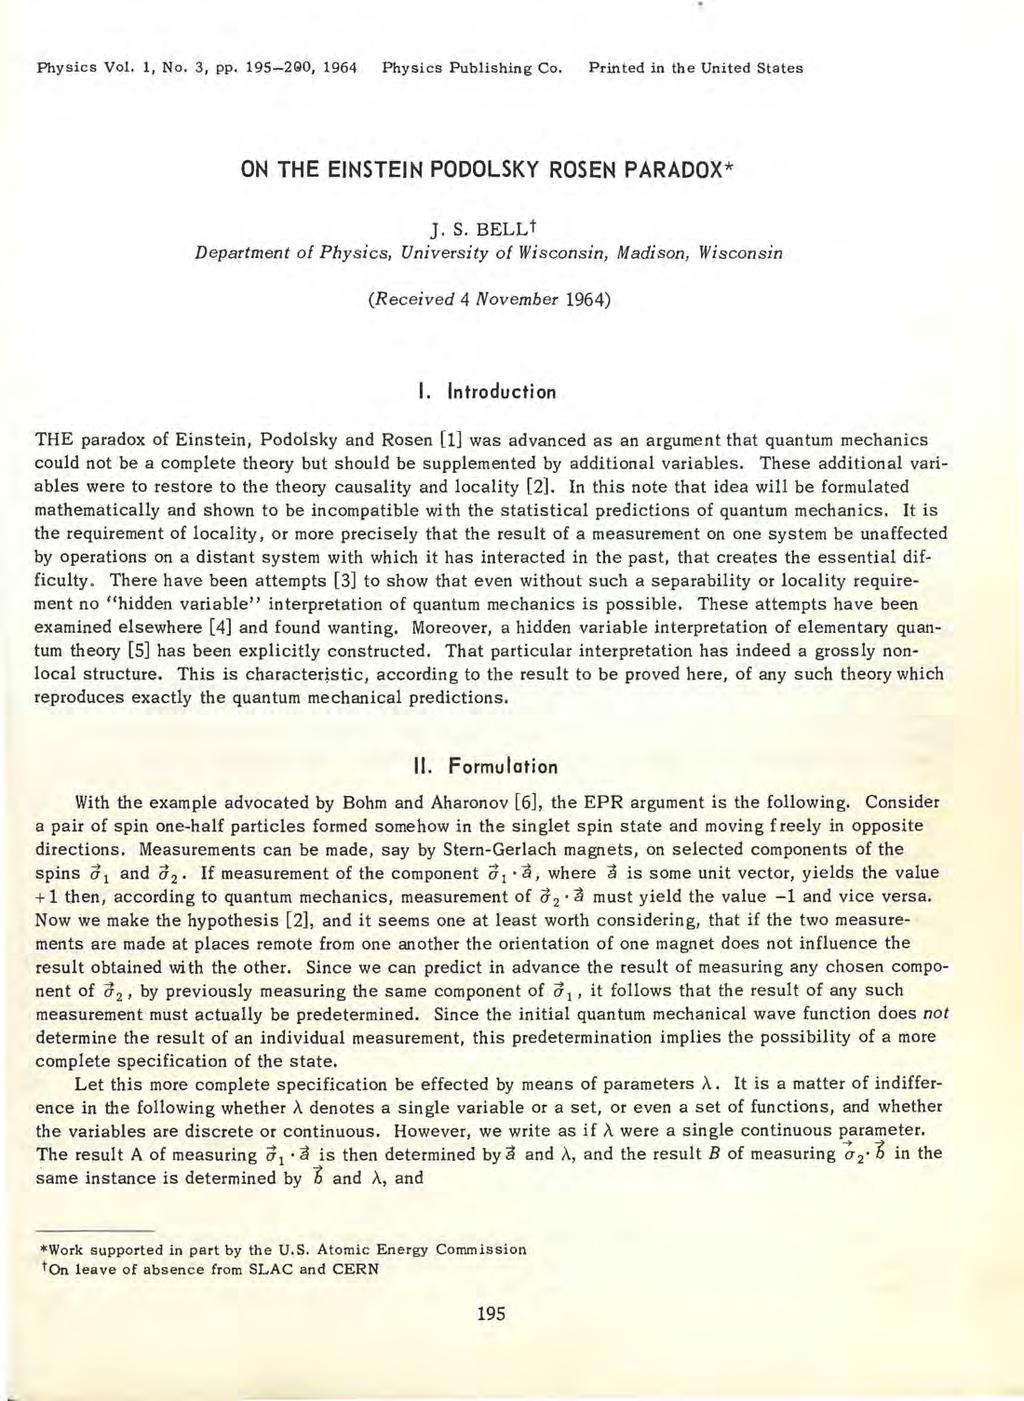 Physics Vol. 1, No. 3, pp. 195-290, 1964 Physics Publishing Co. Printed in the United States ON THE EINSTEIN PODOLSKY ROSEN PARADOX* ]. S. BELLt Department of Physics, University of Wisconsin, Madison, Wisconsin (Received 4 November 1964) I.